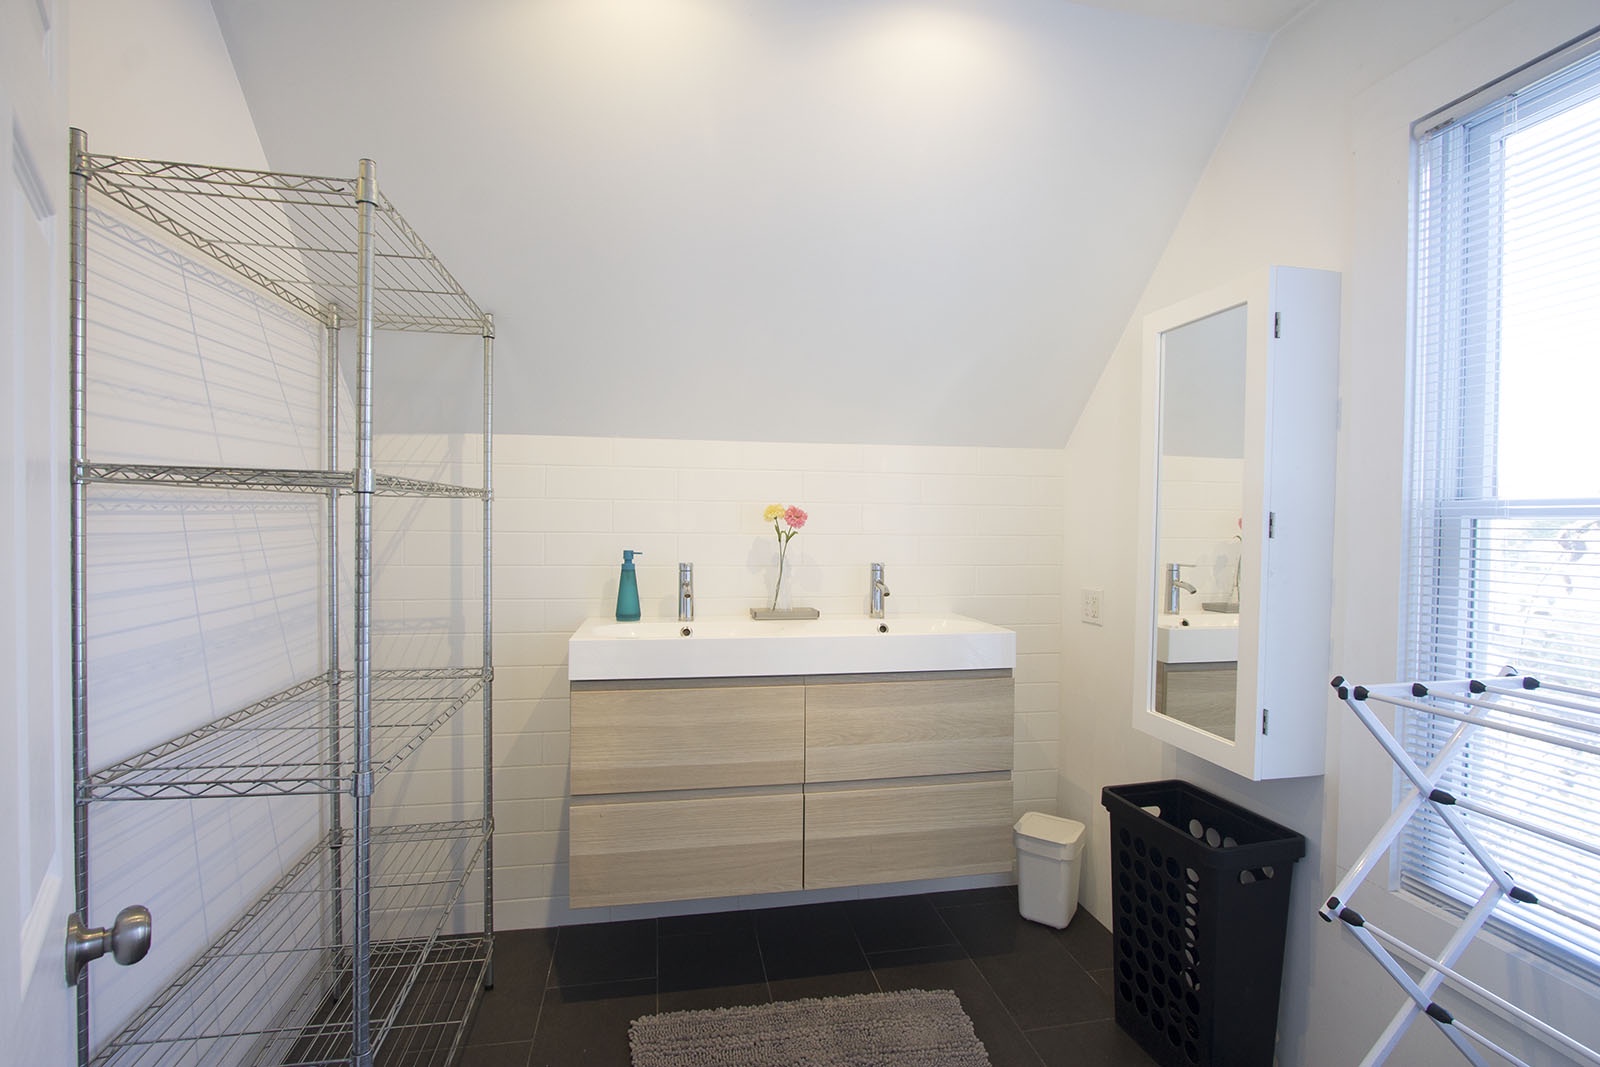 Upstairs is a European-style full bath with walk-in shower.